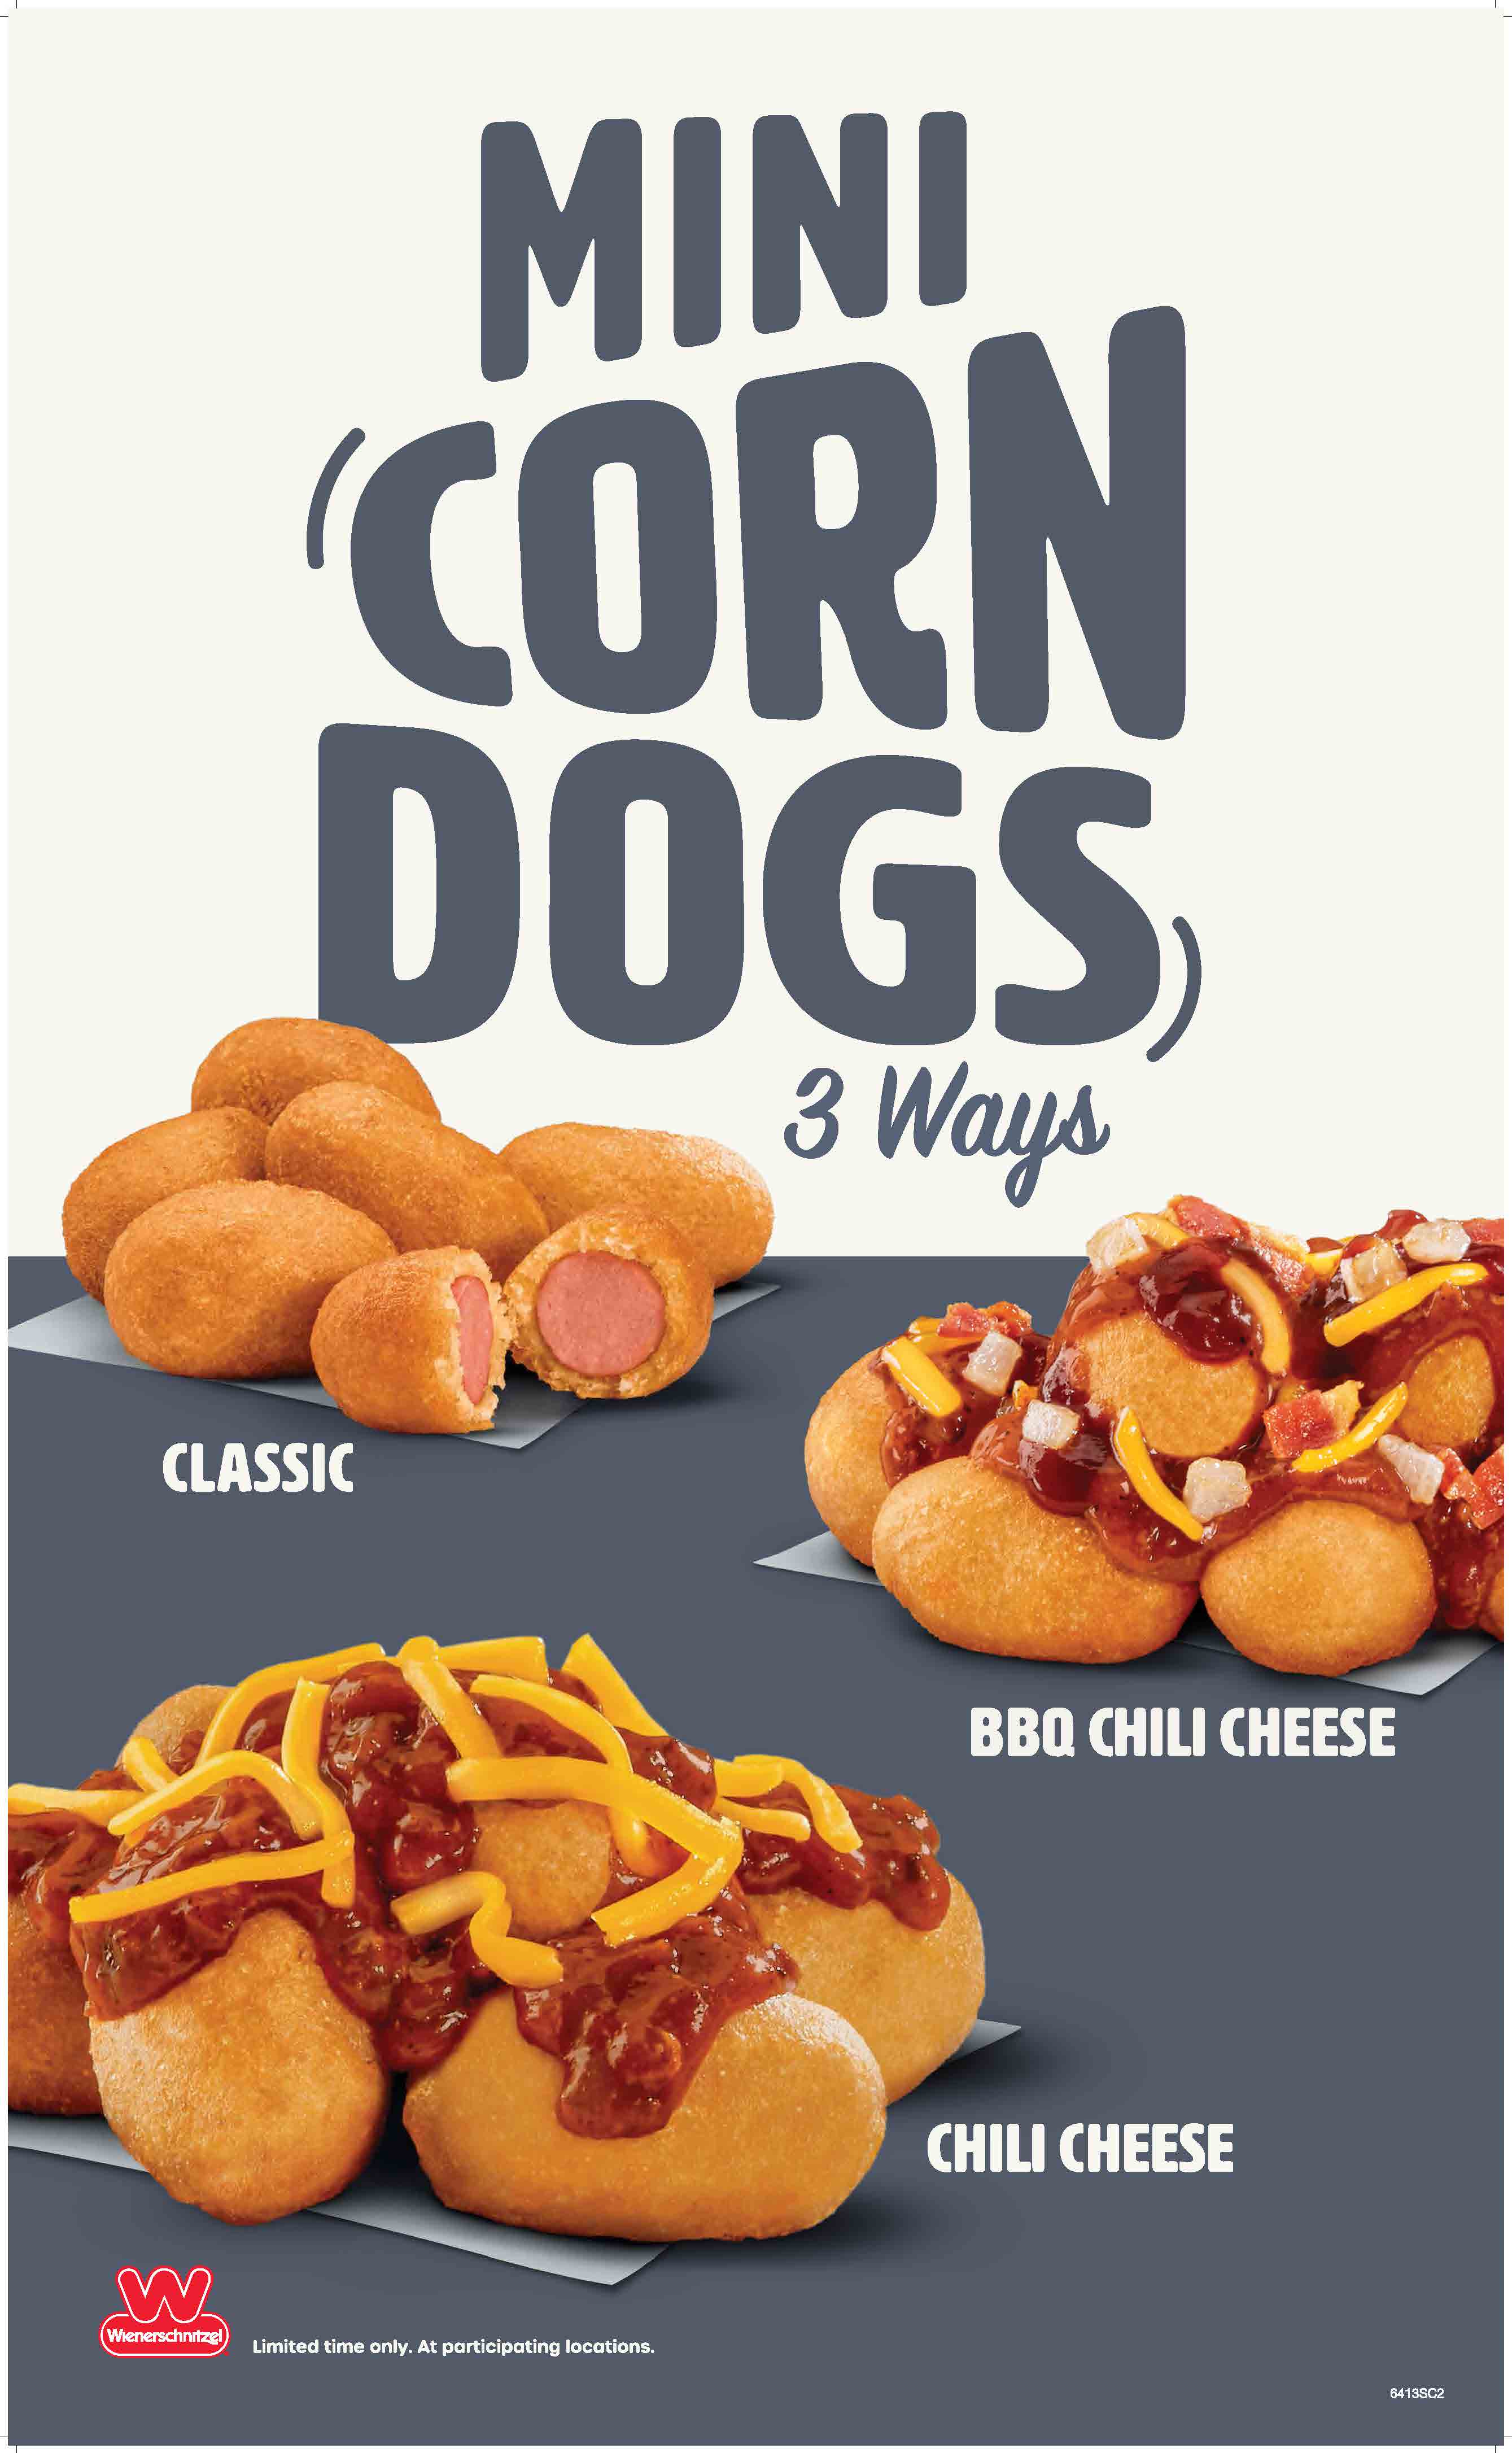 Wienerschnitzel to offer a crew member favorite – Mini Corn Dogs topped with Chili and Cheese